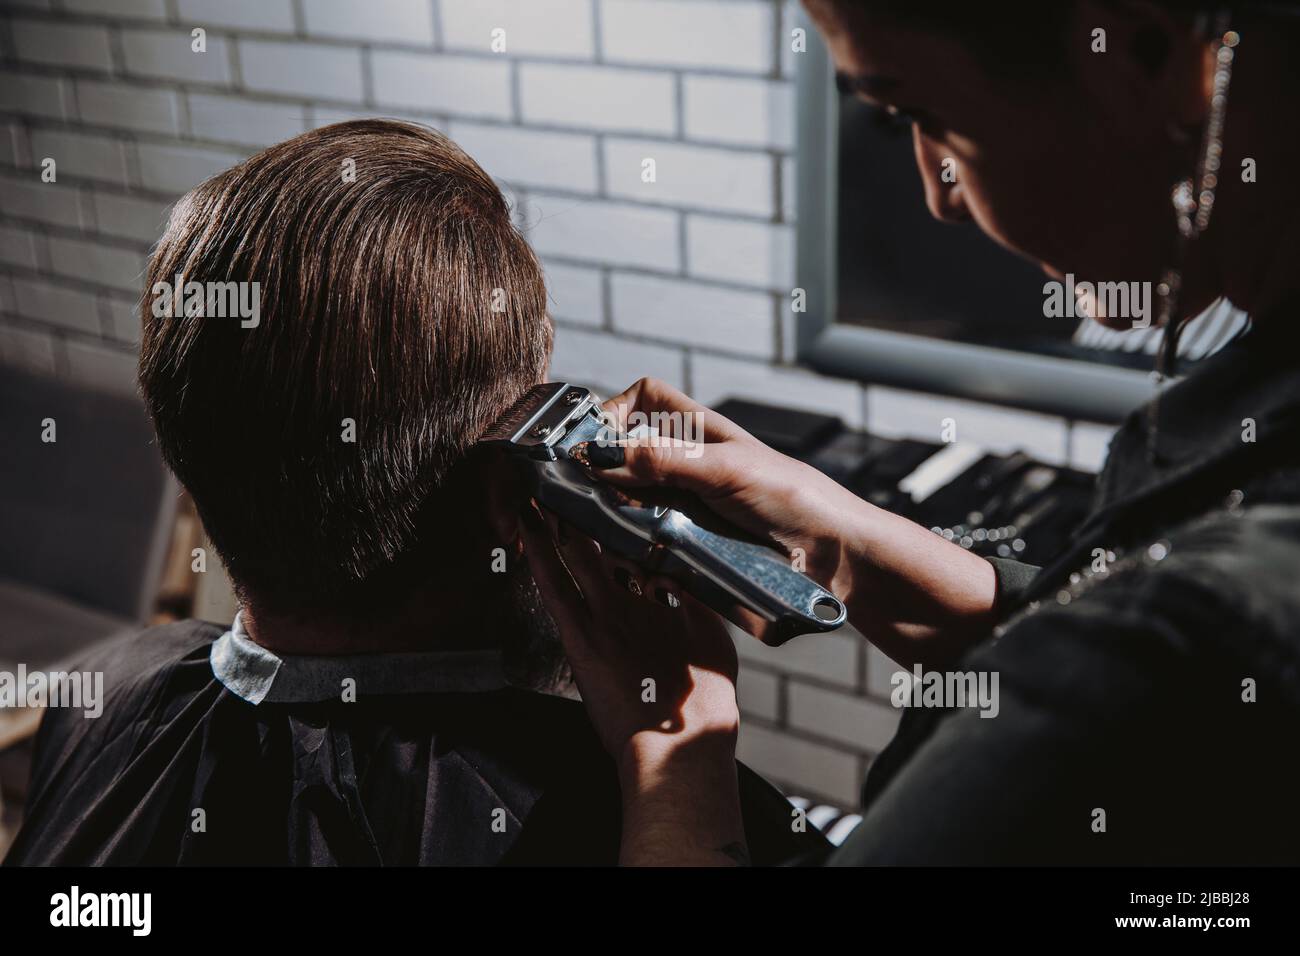 Man getting trendy haircut in barber shop. Stock Photo